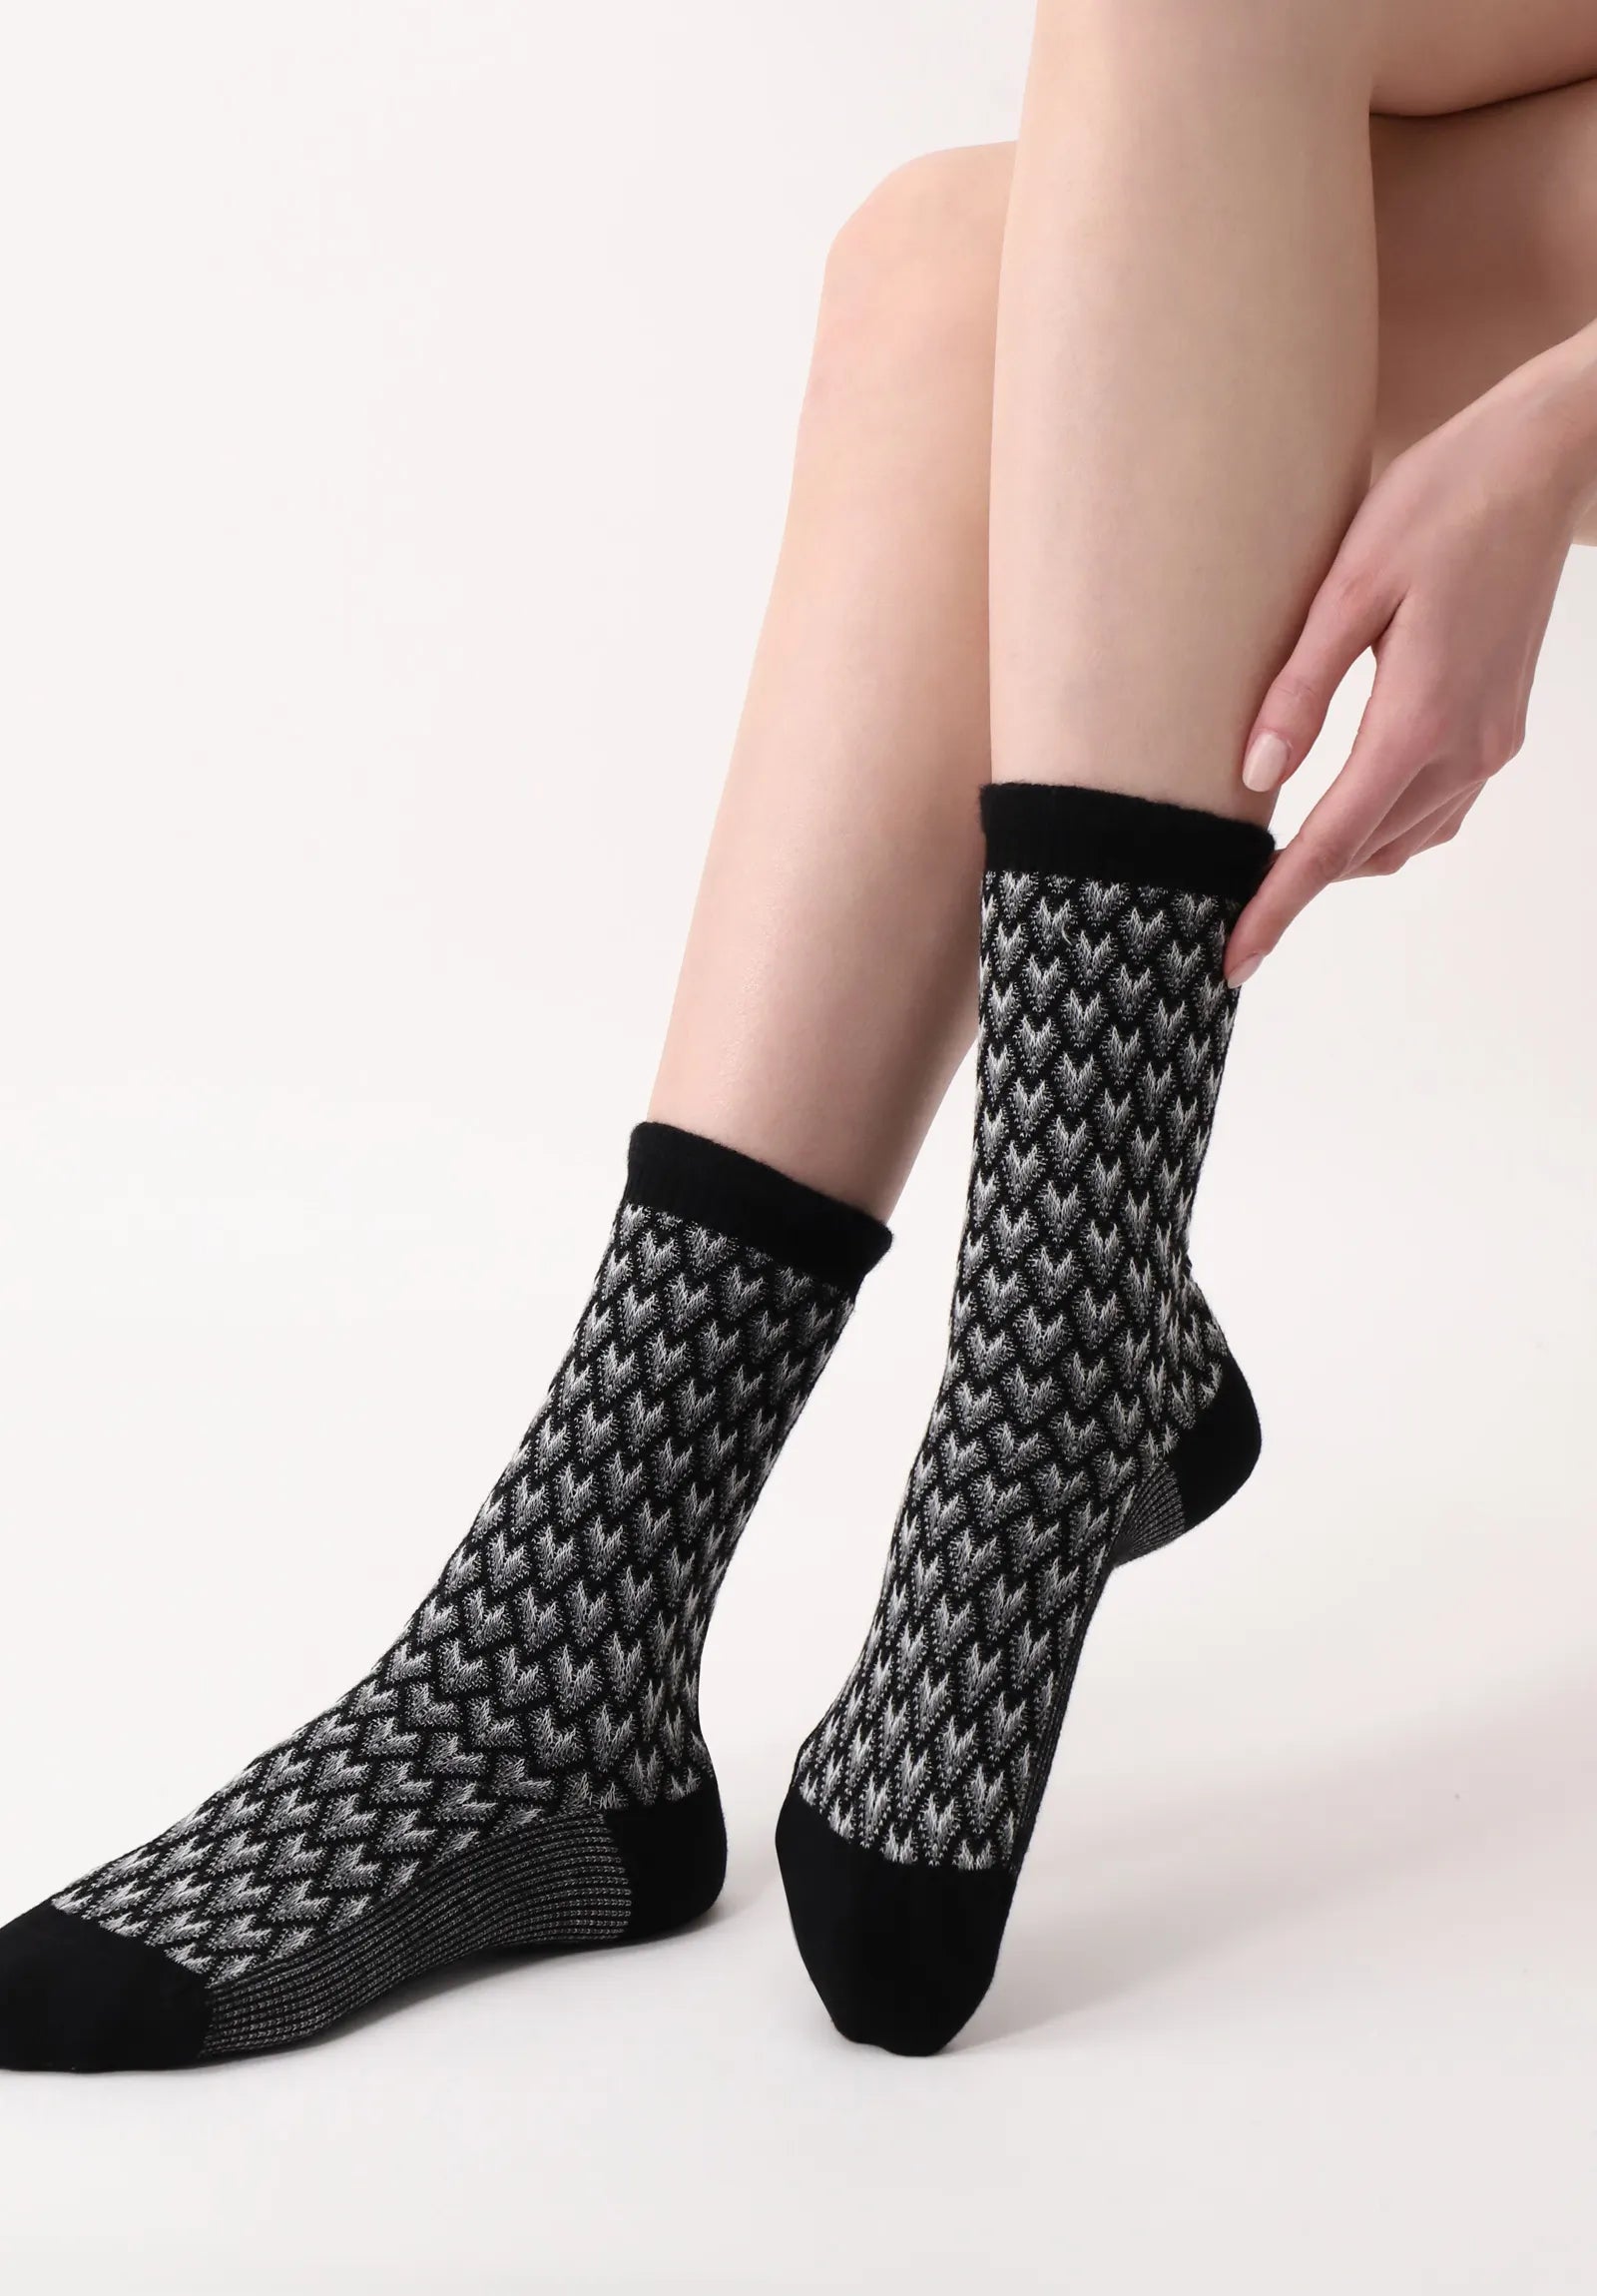 Oroblù Jacquard Deco Ankle Sock - Black cotton mix fashion light knitted ankle socks with a three tone jacquard pattern in shades of grey and slight ruffled cuff.